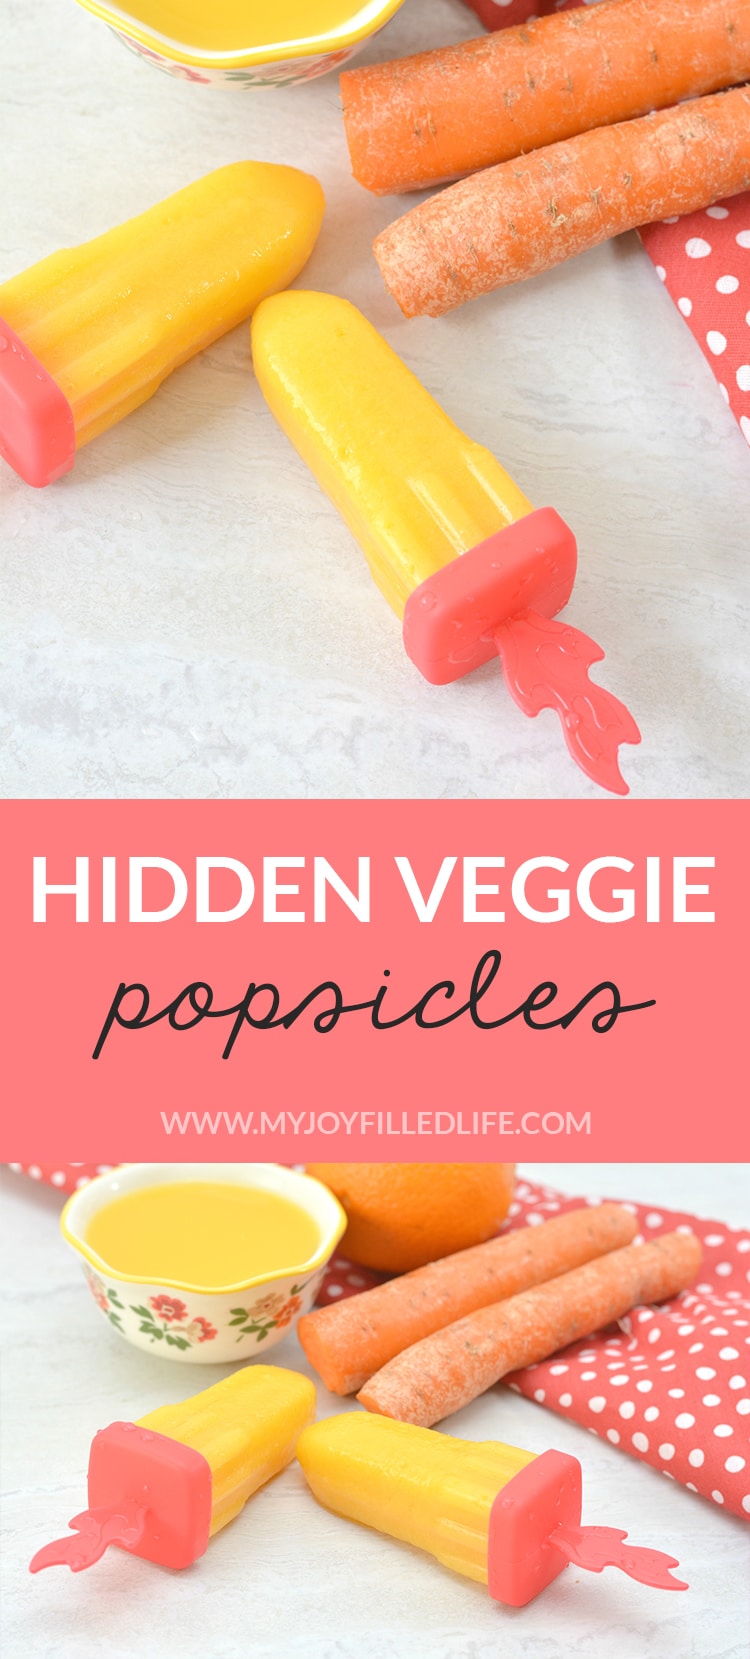 This popsicle recipe is the perfect summer treat for picky eaters! Your kids will love cooling down with these hidden veggie popsicles this summer! #popsicles #frozentreat #hiddenveggies #veggiepopsicles #homemadepopsicles